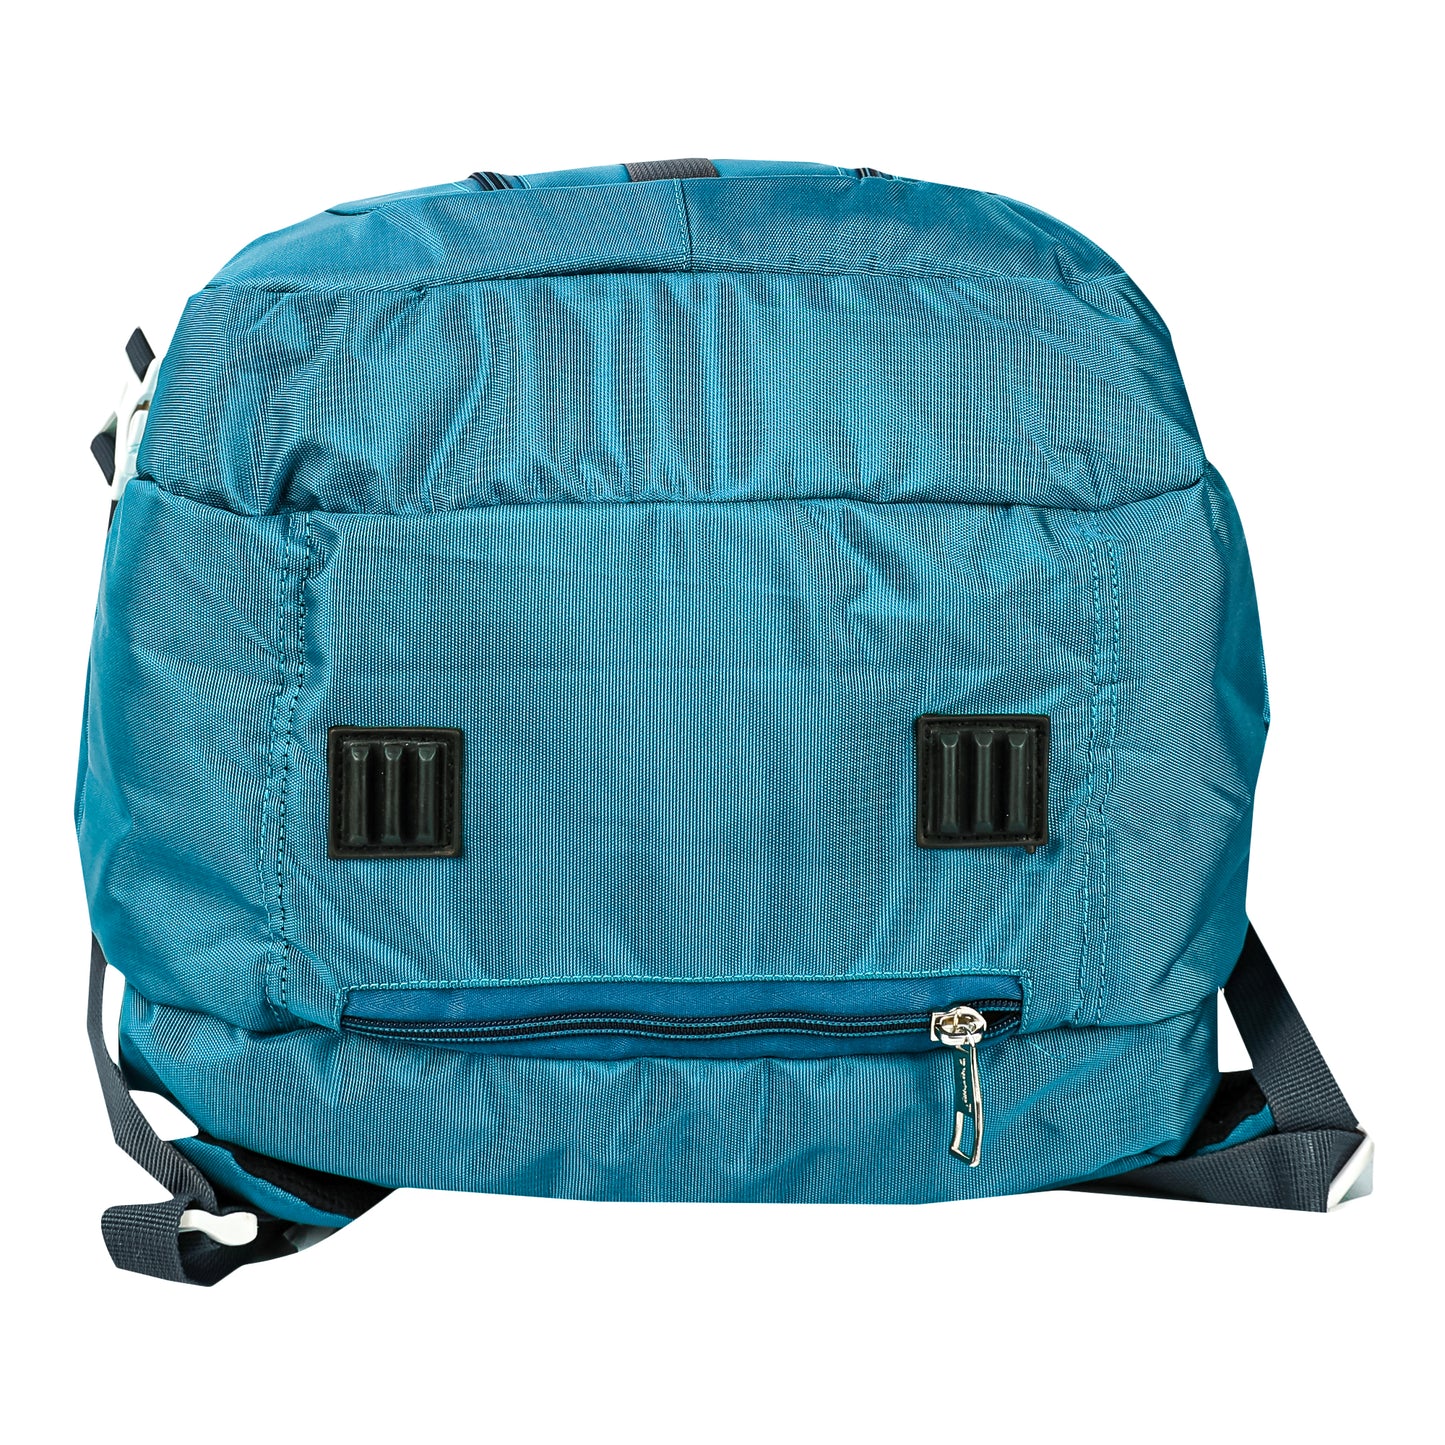 Dhariwal Modern Travel/College Backpack With Rain Cover 63L BP-214 With Rain Cover